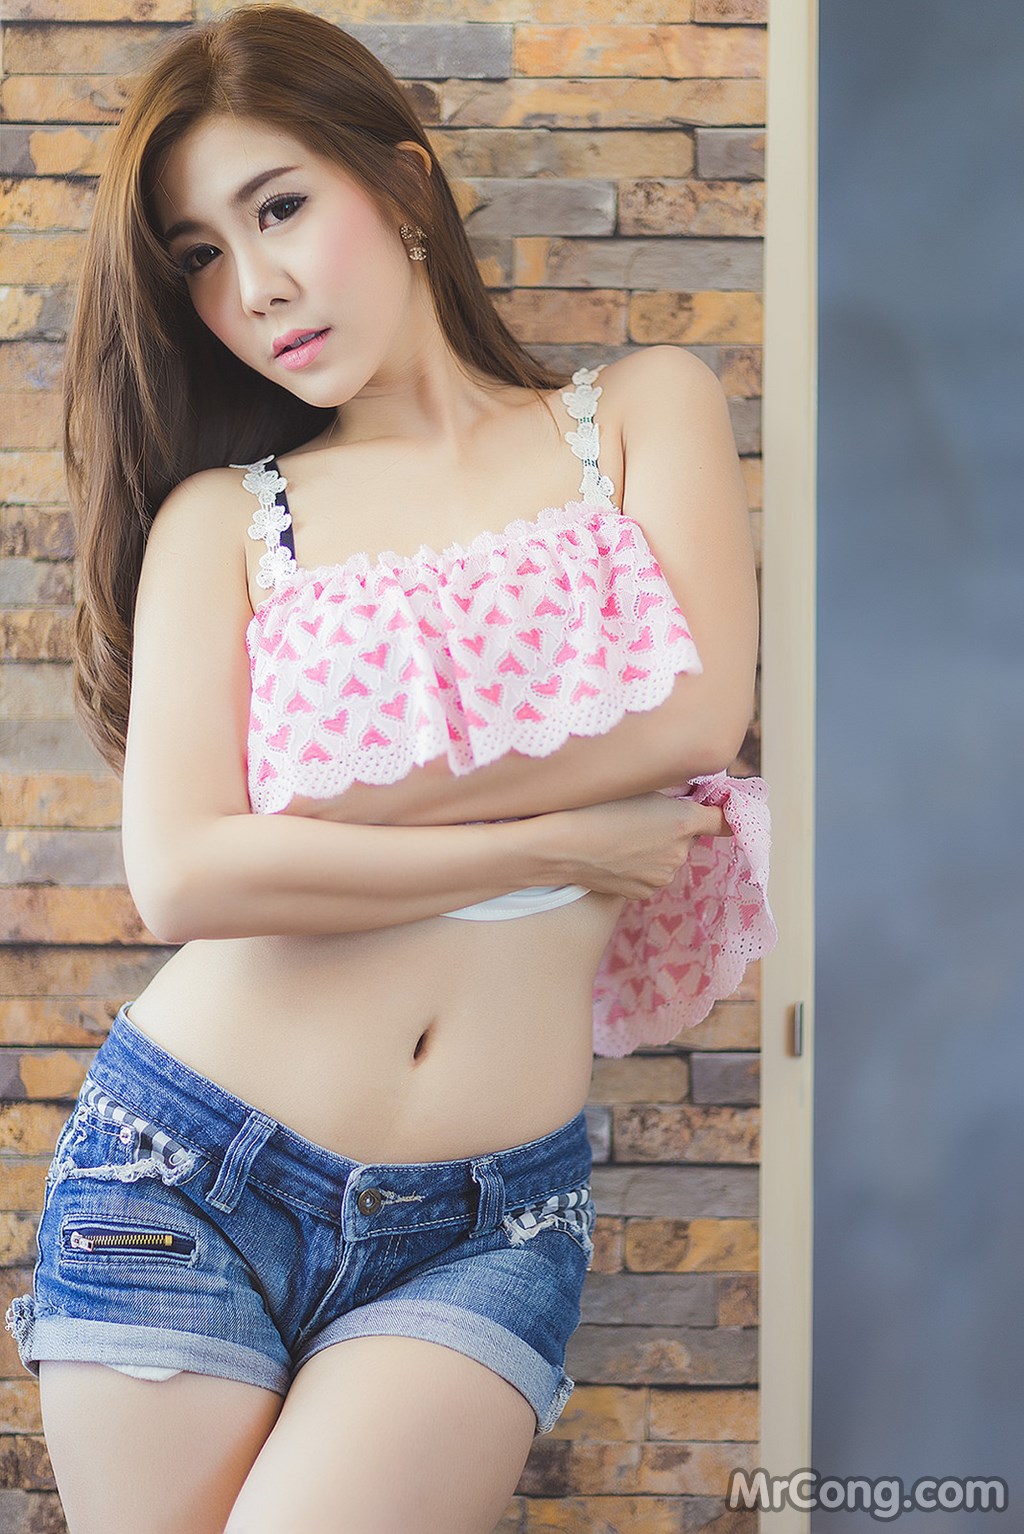 Beautiful and sexy Thai girls - Part 4 (430 photos)